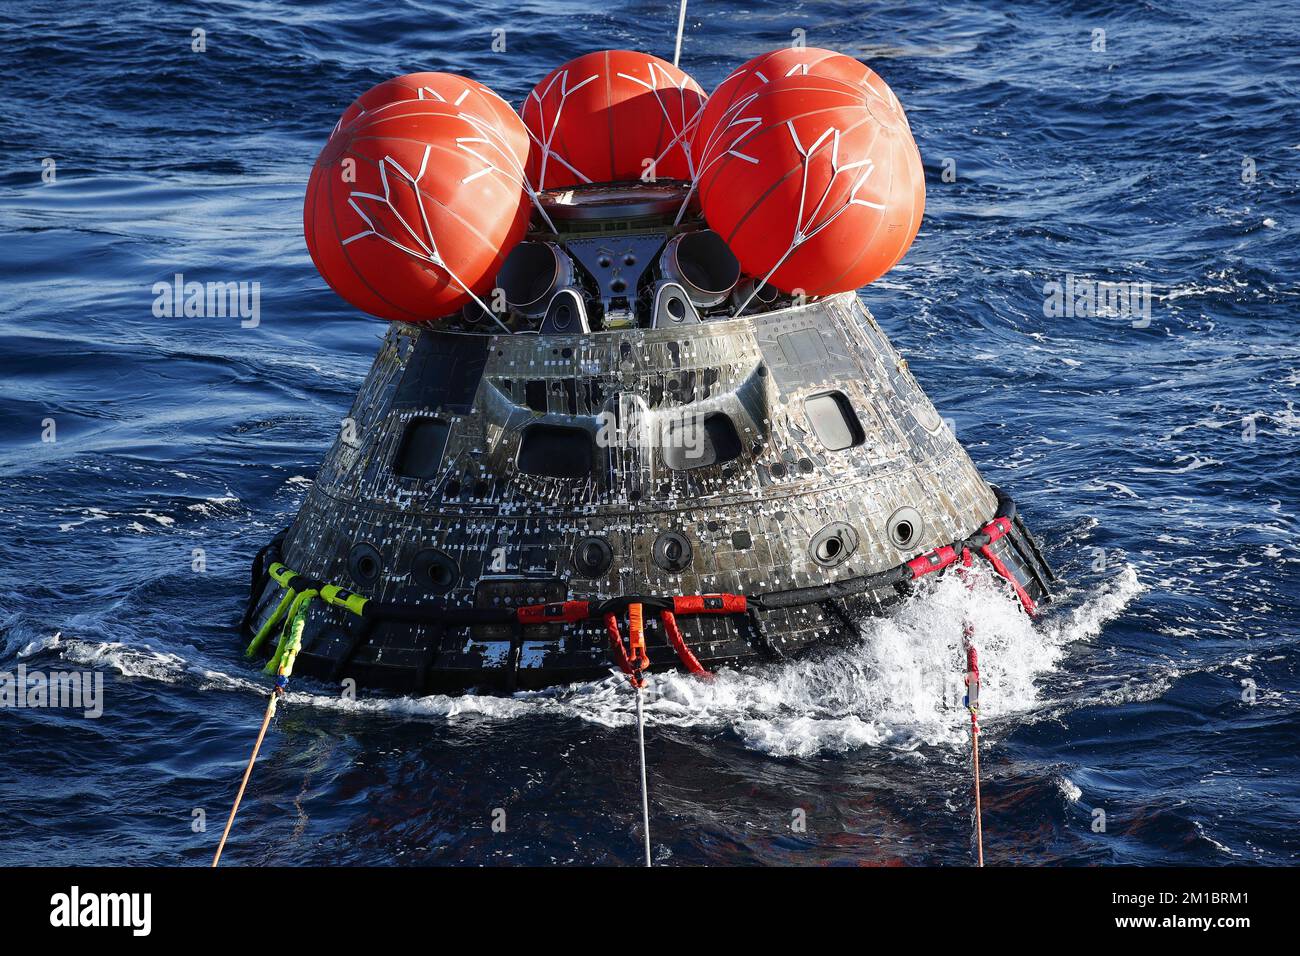 Baja California, Mexico, on Sunday, December 11, 2022. NASA's Orion Capsule is towed during recovery operations after it splashed down following a successful uncrewed Artemis I Moon Mission on Sunday, December 11, 2022, as seen from aboard the U.S.S. Portland in the Pacific Ocean off the coast of Baja California, Mexico. The 26-day Artemis I mission took the Orion spacecraft to the moon and back to complete a historic flight. Pool Photo by Mario Tama/UPI Credit: UPI/Alamy Live News Stock Photo